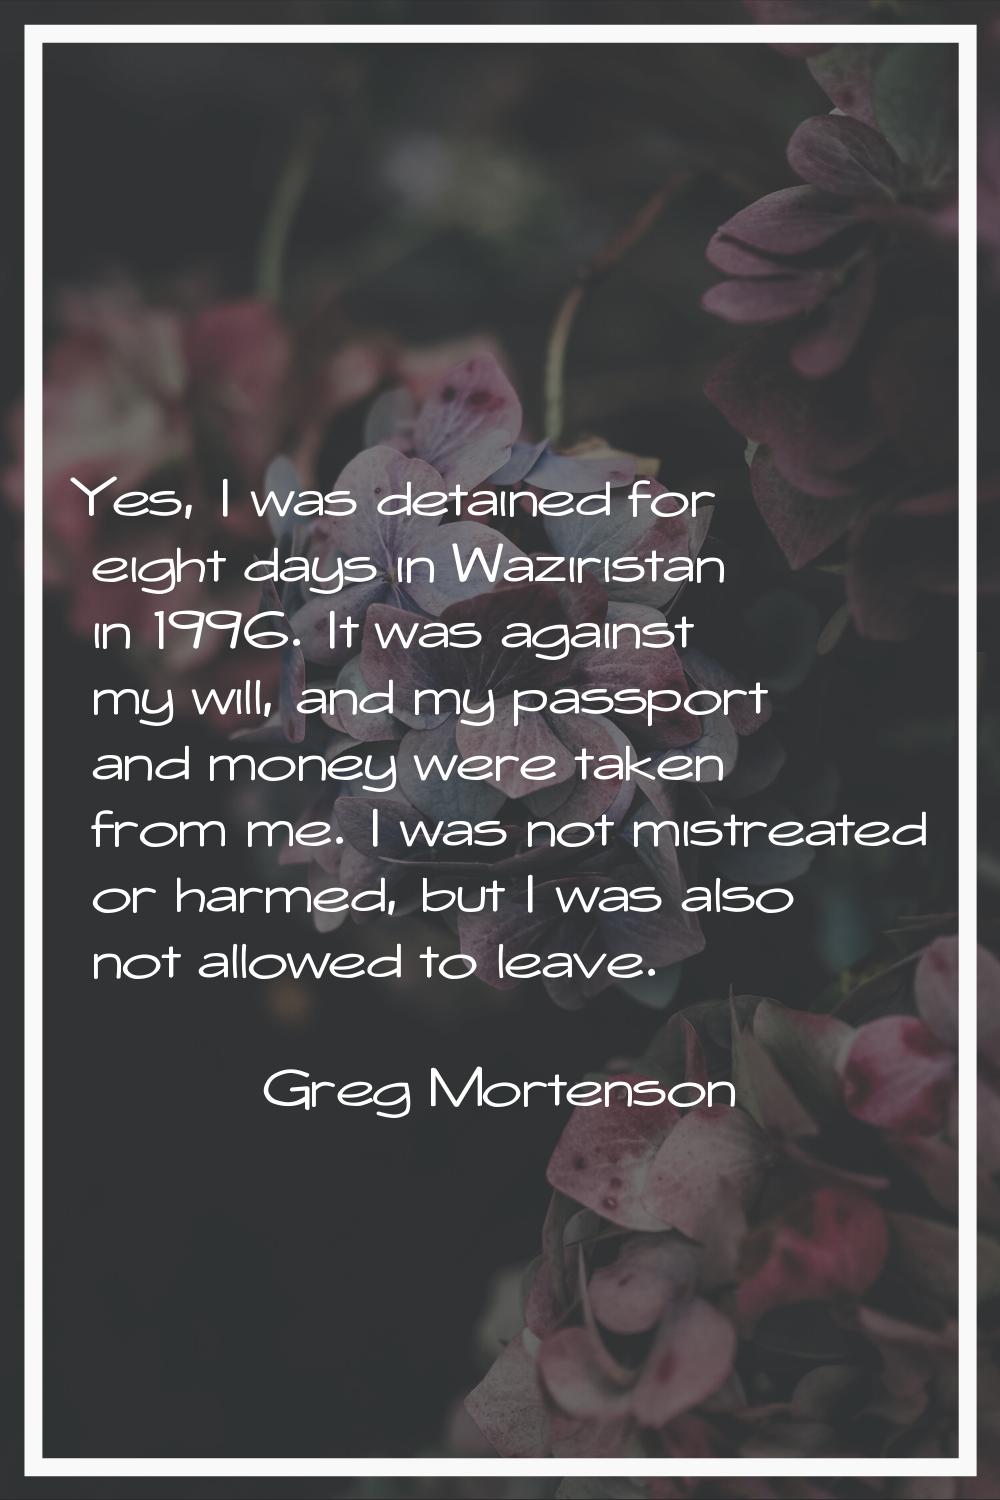 Yes, I was detained for eight days in Waziristan in 1996. It was against my will, and my passport a